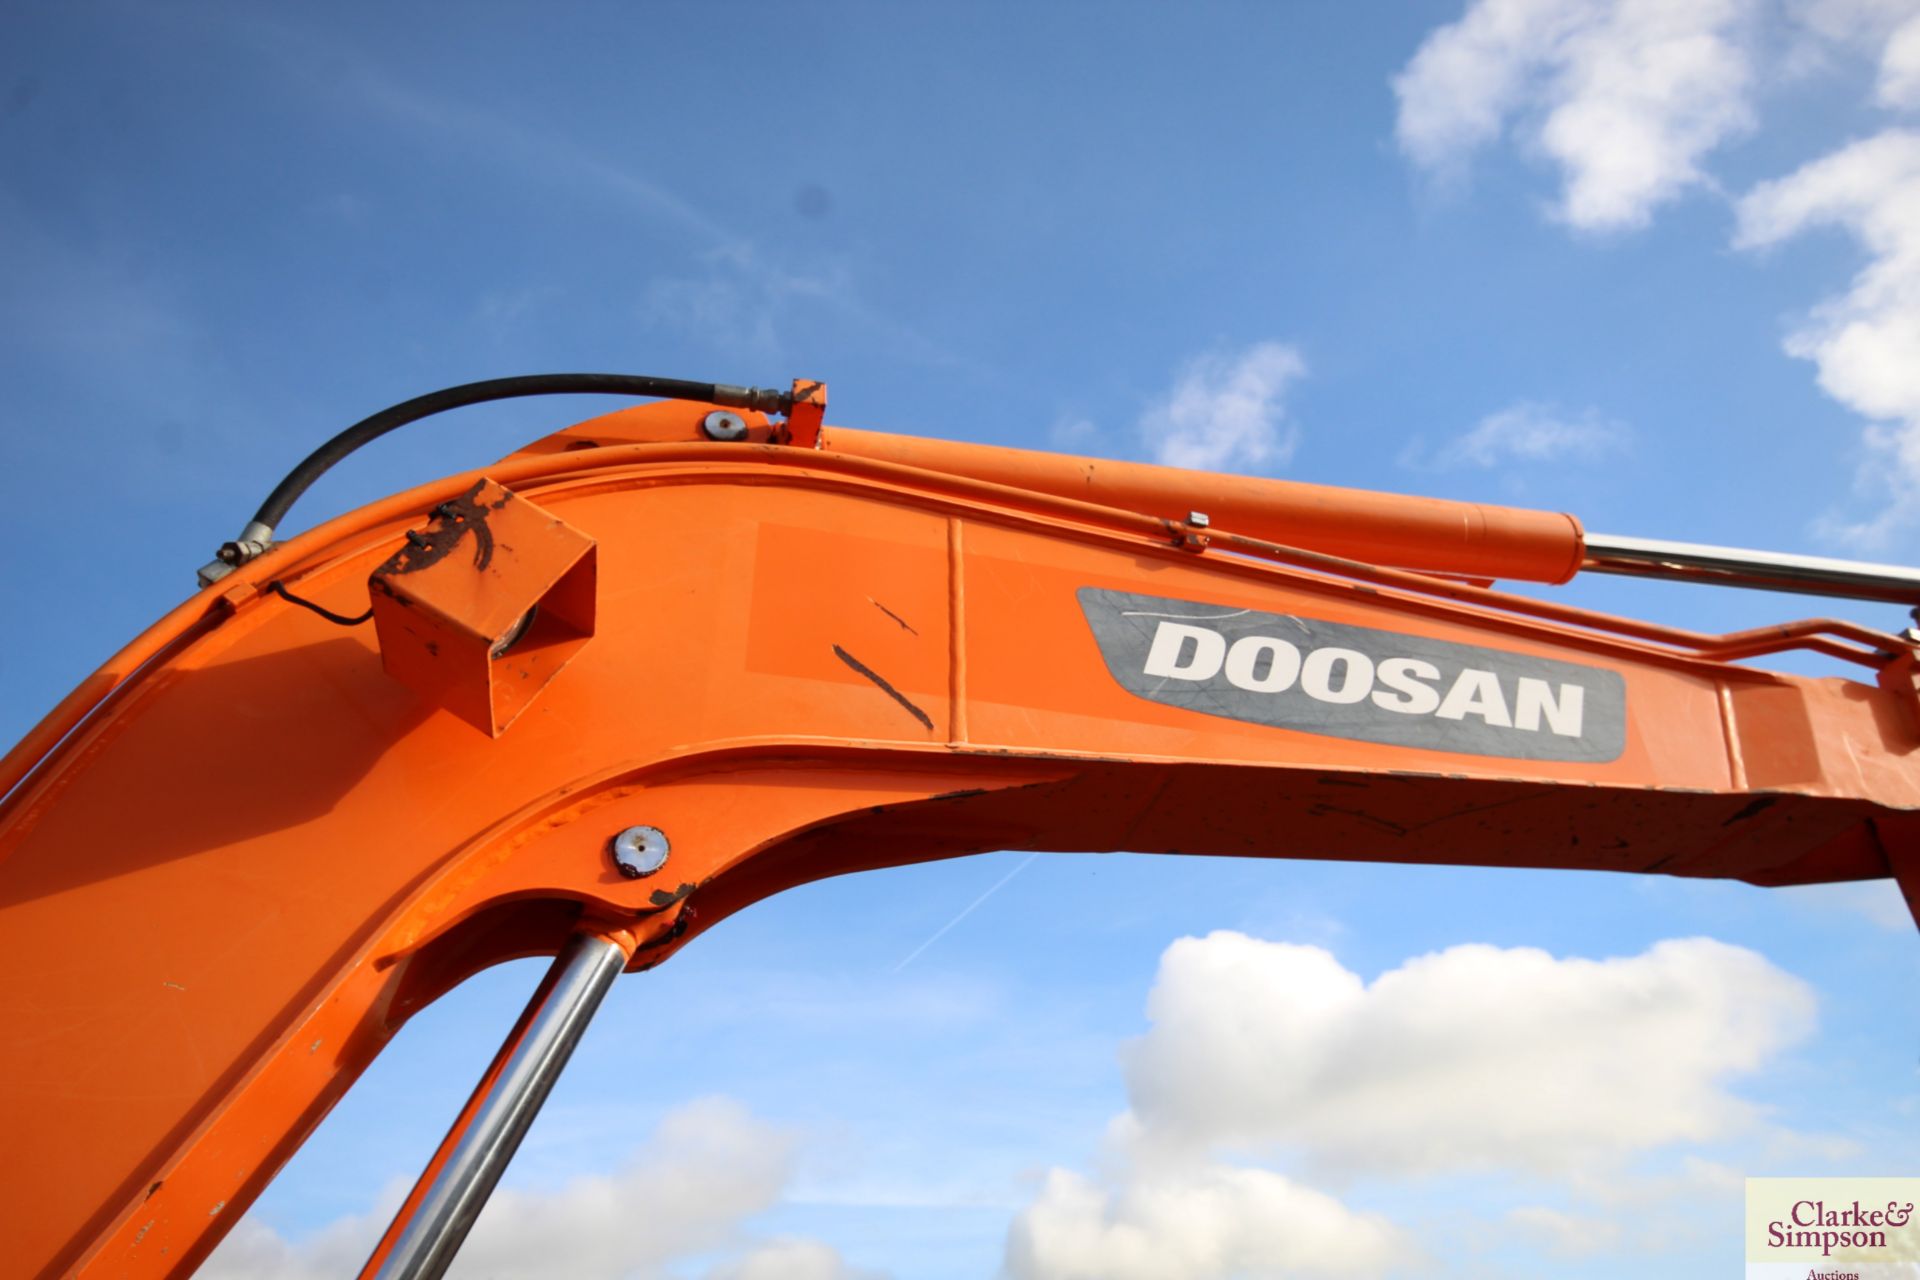 Doosan DX55E 5.5T excavator. 2011. 5,045 hours. Serial number 50461. With new rubber tracks 50 hours - Image 40 of 68